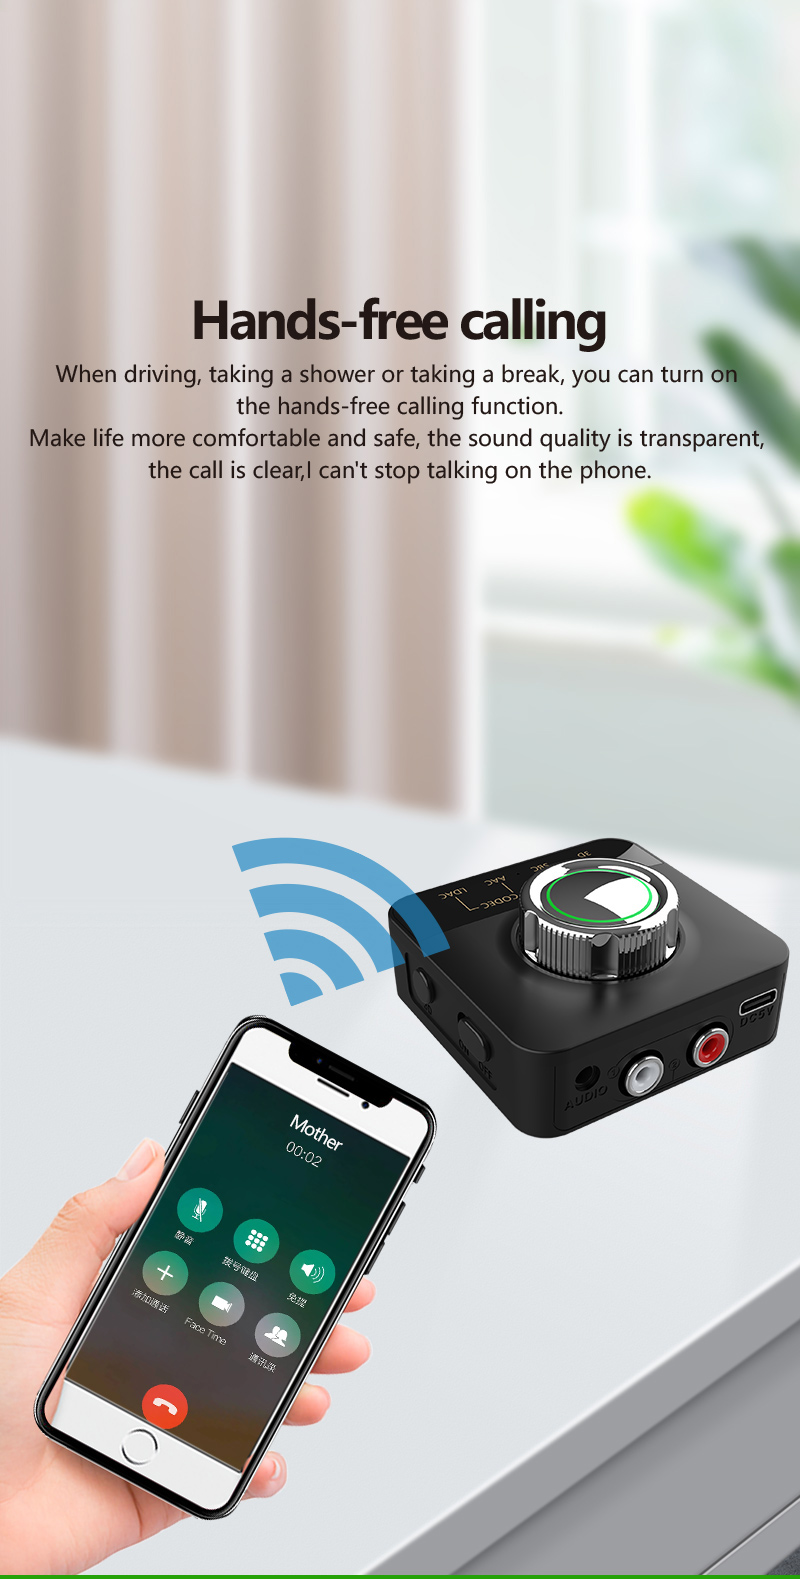 LDAC bluetooth5.0 Wireless Audio Receiver Adapter HiFi 3D Stereo AAC SBC Audio Hands-free Calls 3.5mm AUX Jack for Car Kit